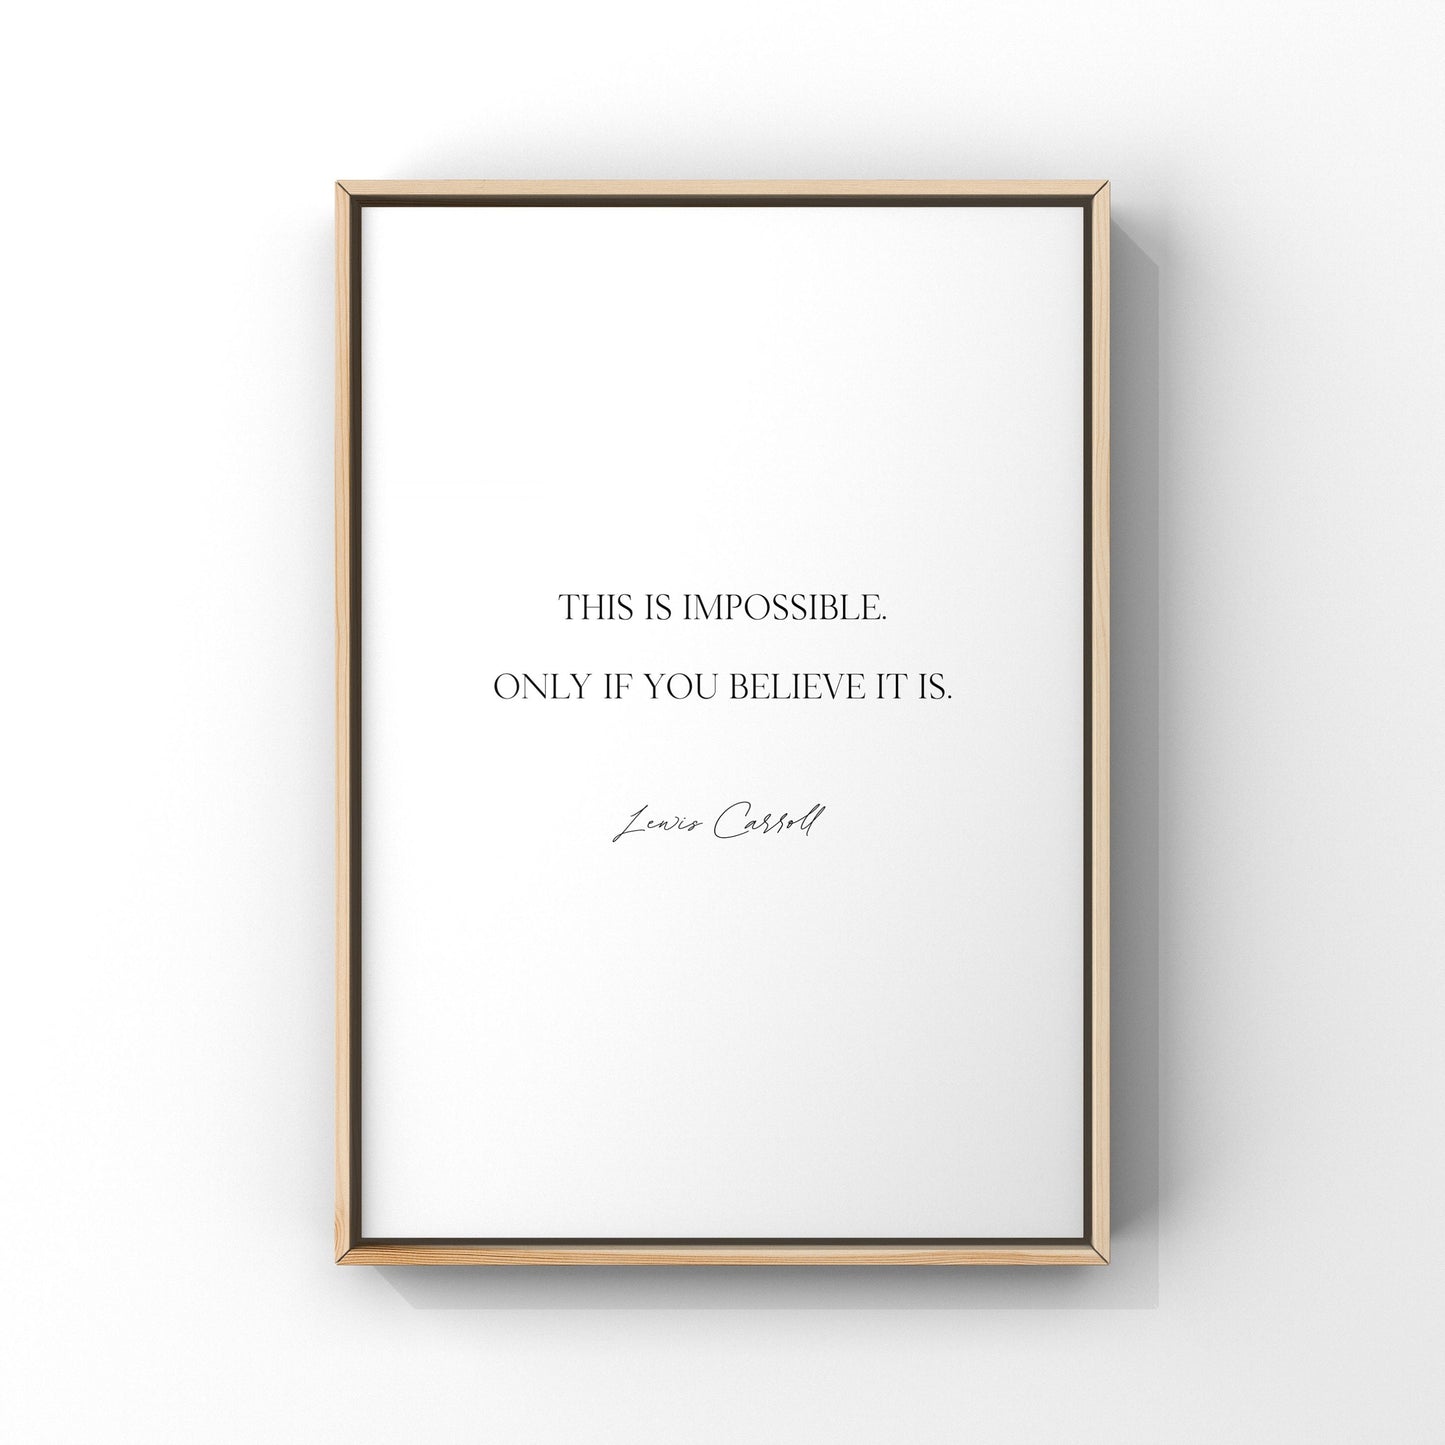 This is impossible only if you believe it is,Alice in Wonderland Print,Wall Decor,Mad Hatter,Office inspiration,Lewis Carroll,Inspirational